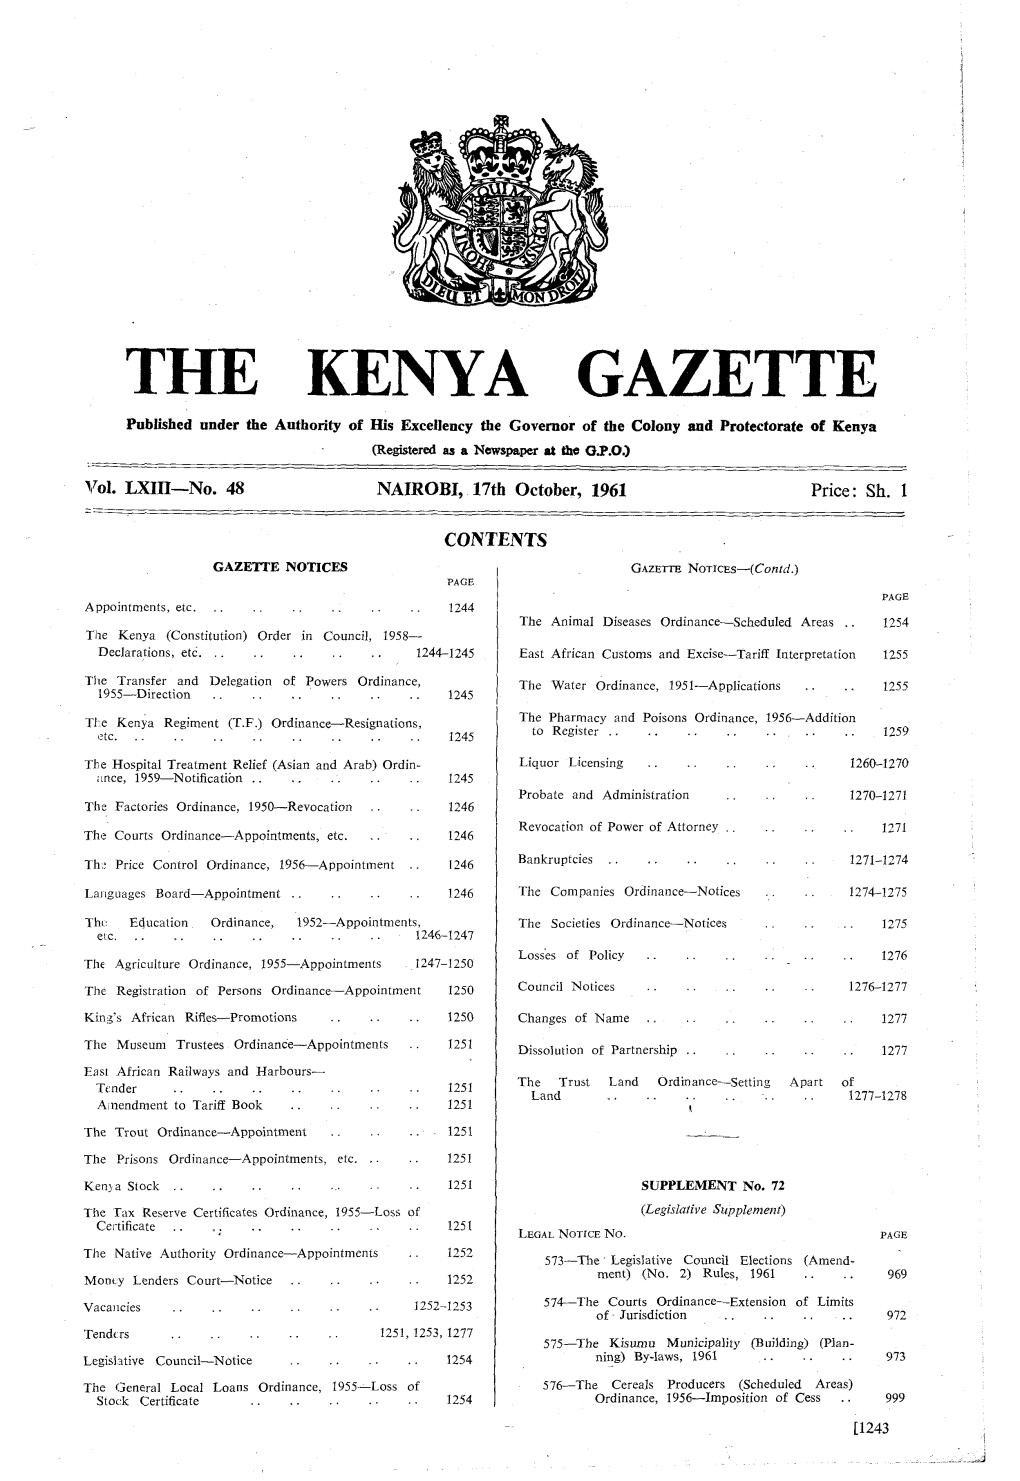 THE KENYA GAZETTE Published Under the Authority of His Excellency the Governor of the Colony and Protectorate of Kenya (Registered As a Newspaper at the 09.0.) L1701